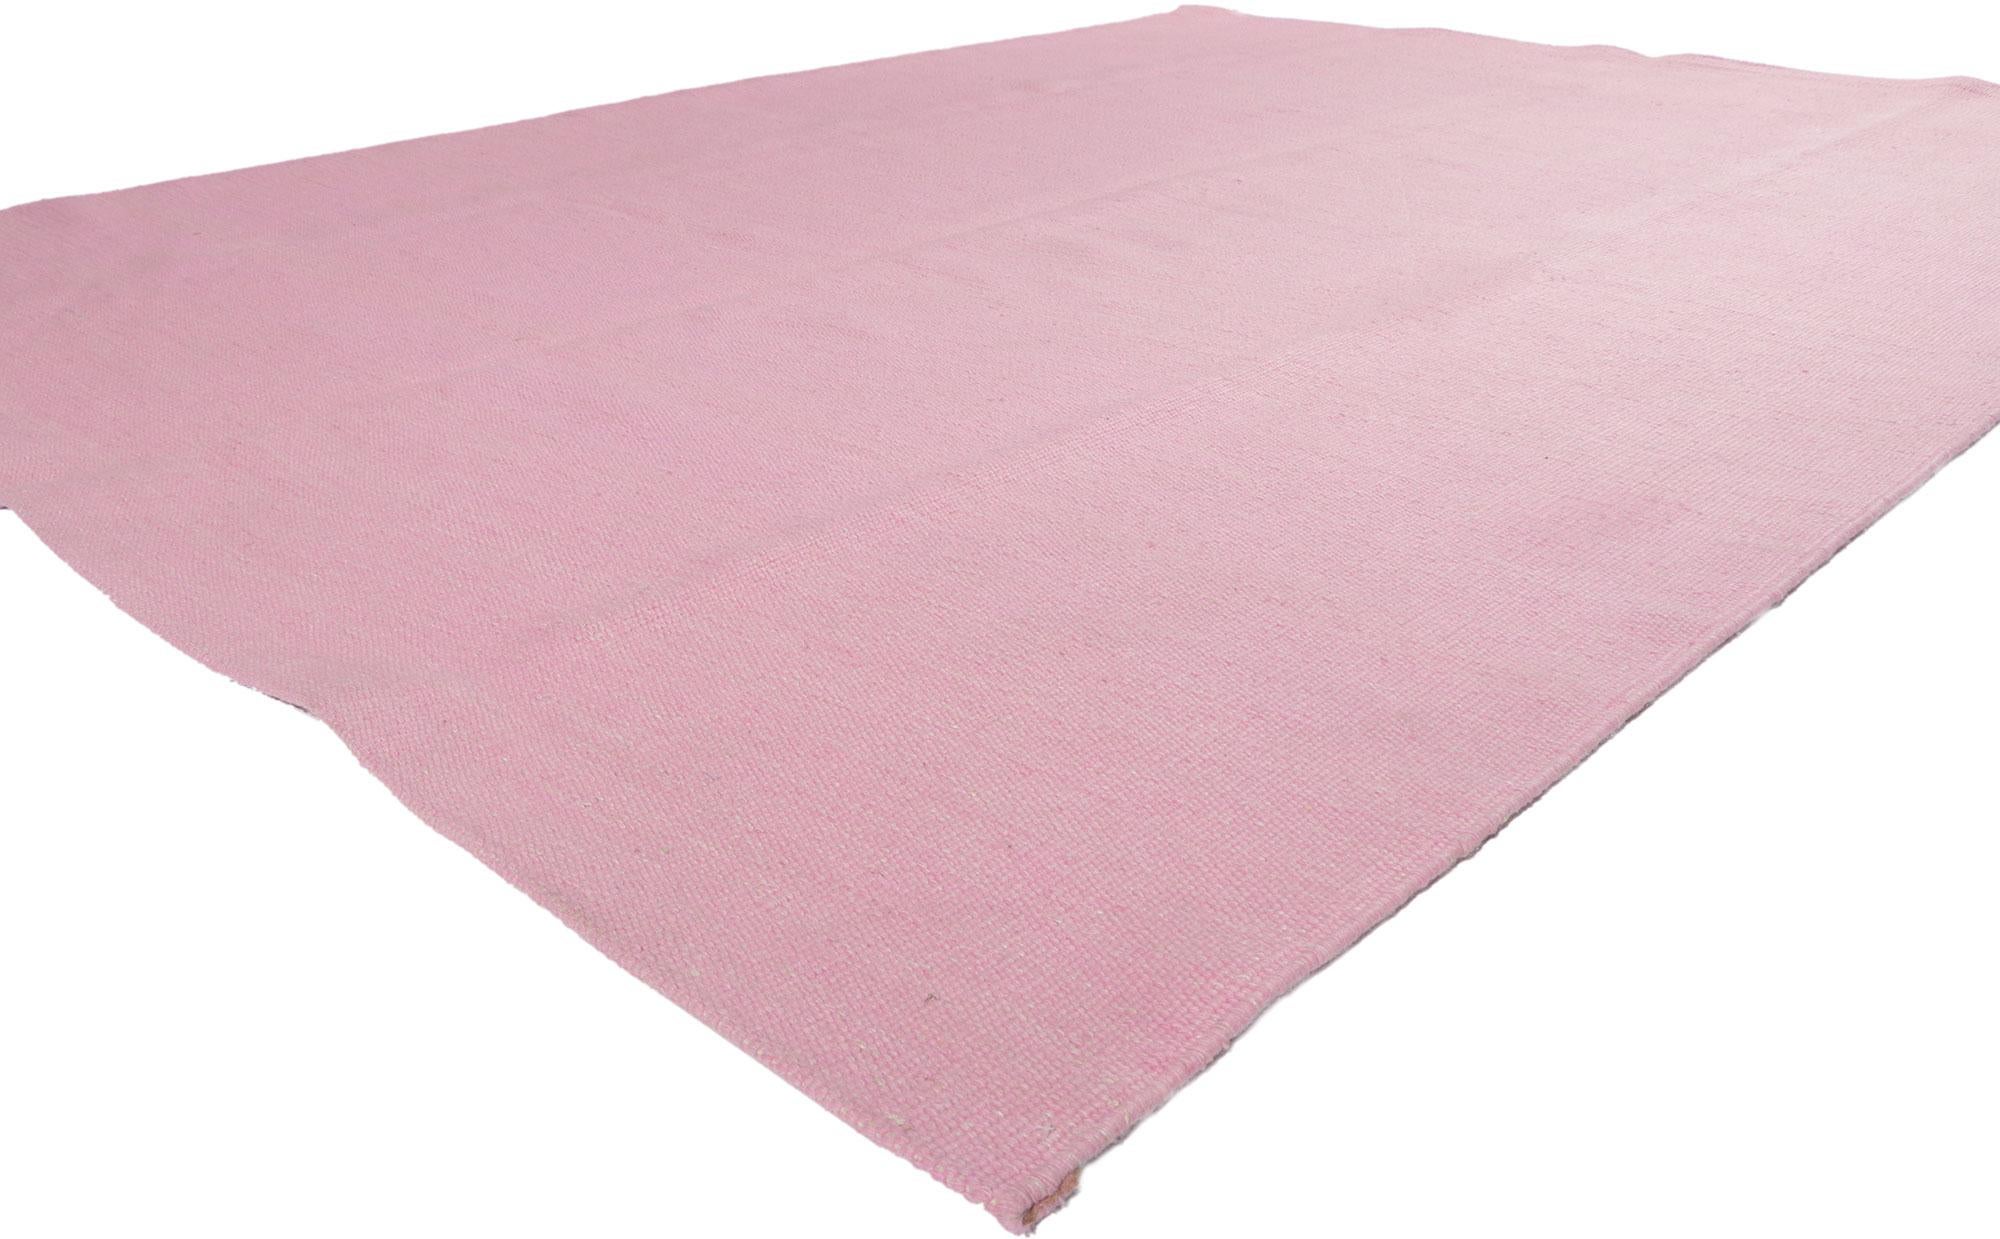 30686 Modern Swedish Inspired Pink Kilim Rug, 08'08 x 11'05.
From subtle to sensation with bohemian hygge vibes, this hand-woven wool Swedish inspired pink Kilim rug beautifully embodies the simplicity of Scandinavian modern style. Imbued pink hues,